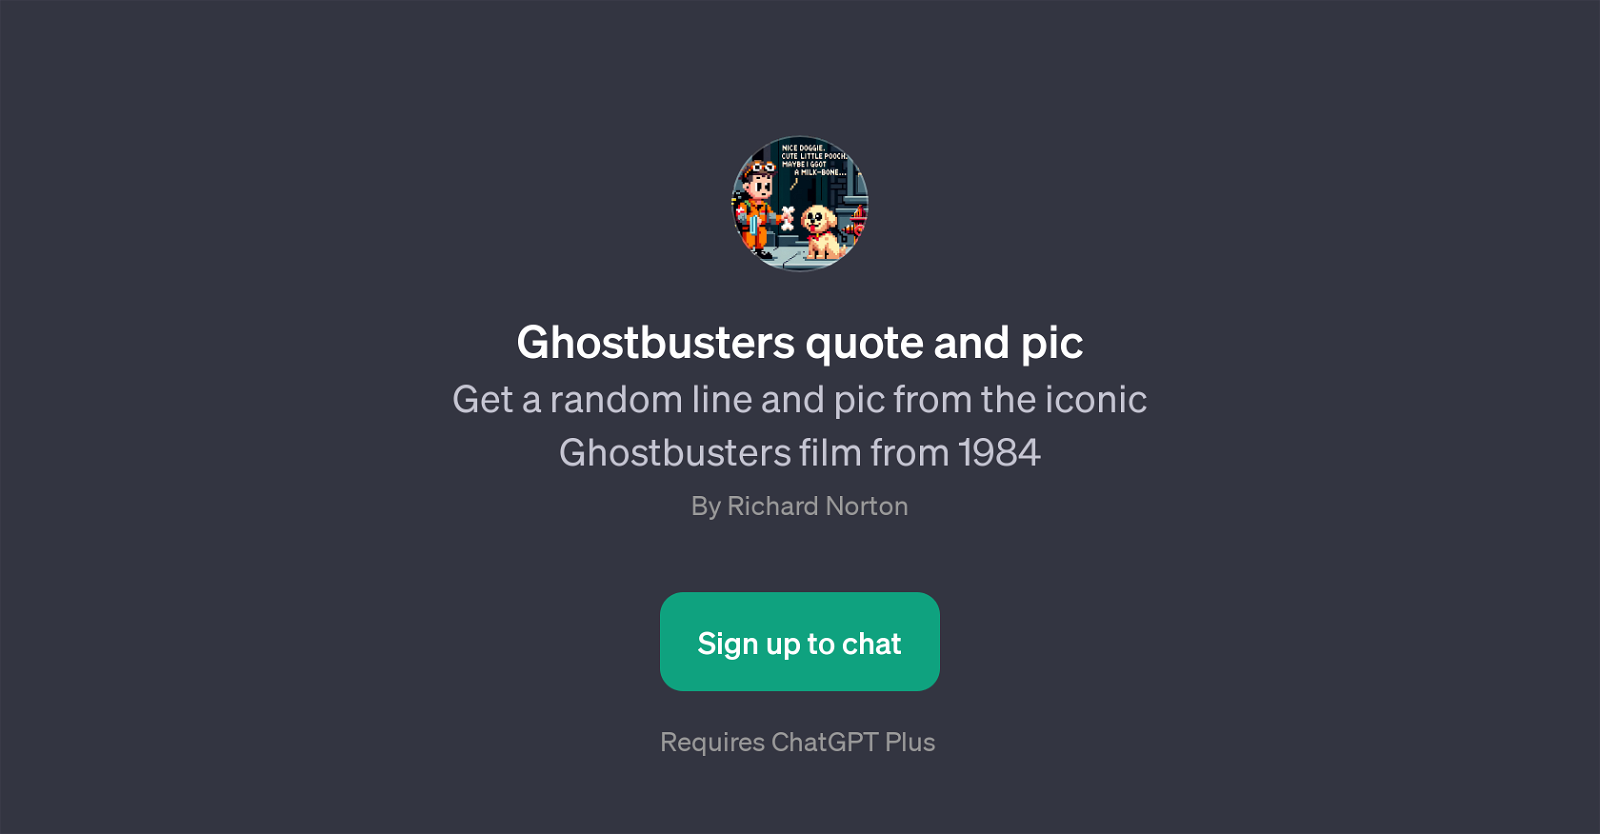 Ghostbusters quote and pic website